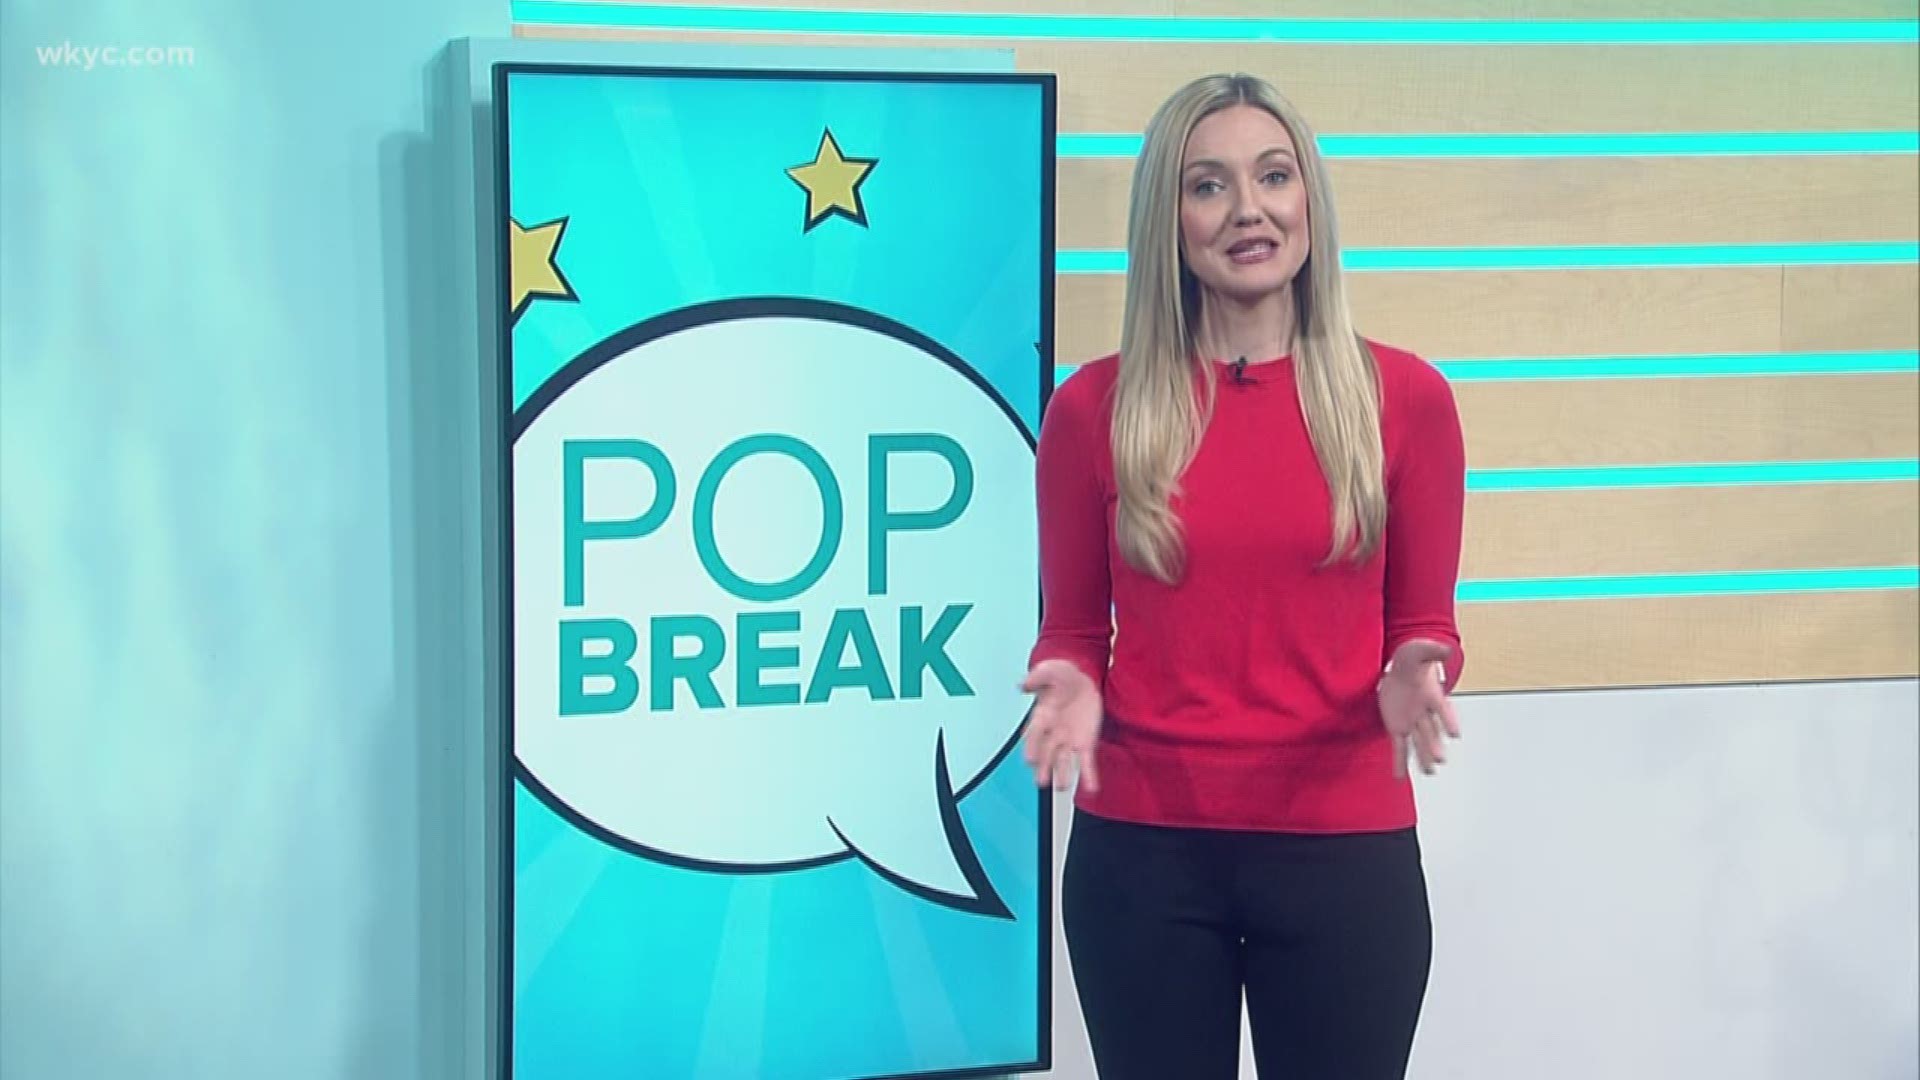 Stephanie Haney has the latest entertainment news on Pop Break. Topping the news is a Bachelor-related headline.